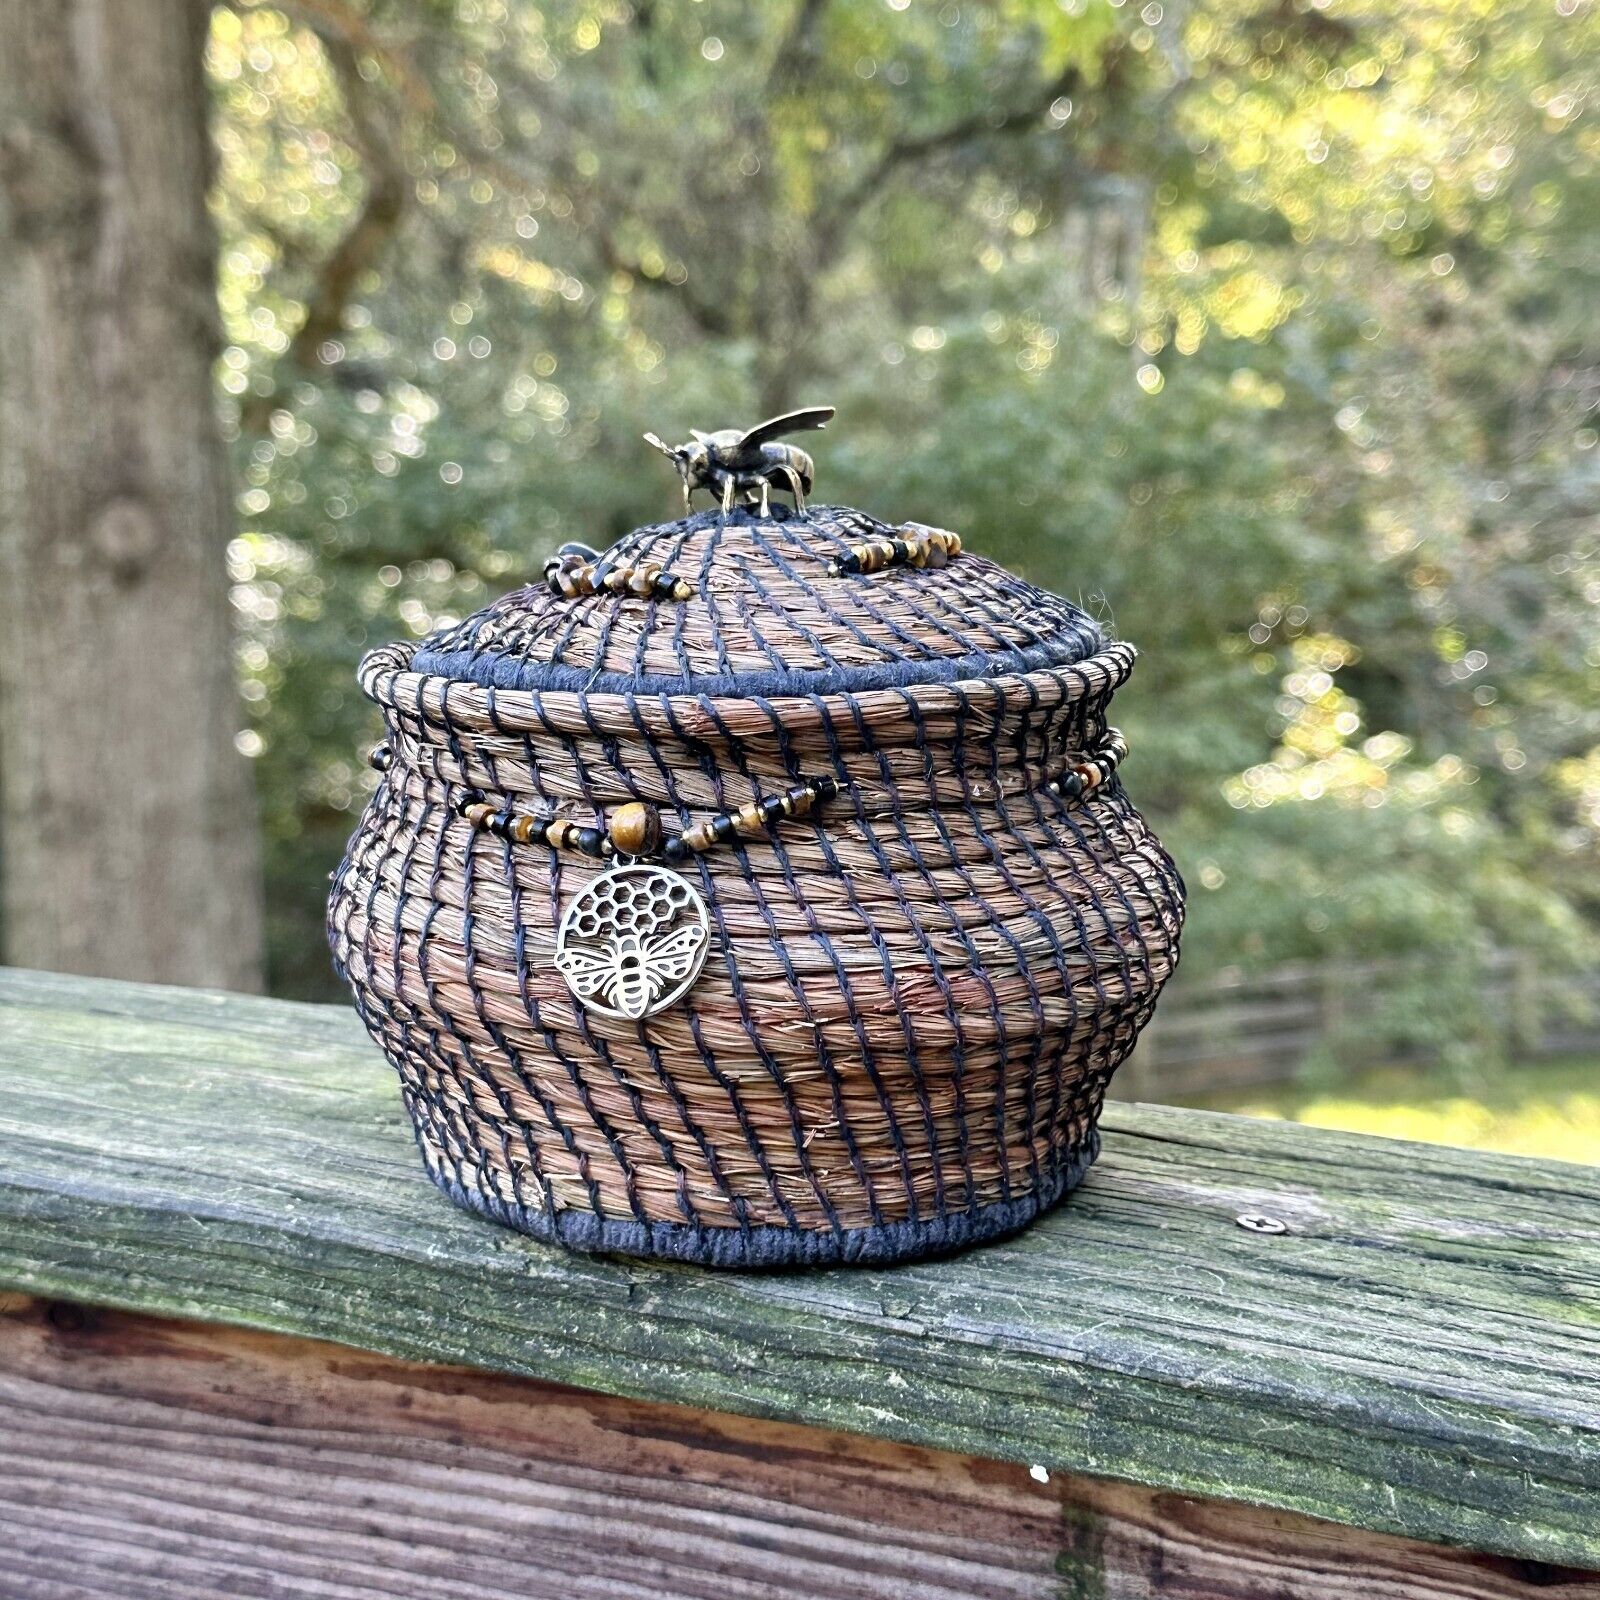 HONEY BEE- THEMED HANDCRAFTED ONE-OF-A-KIND PINE NEEDLE BASKET